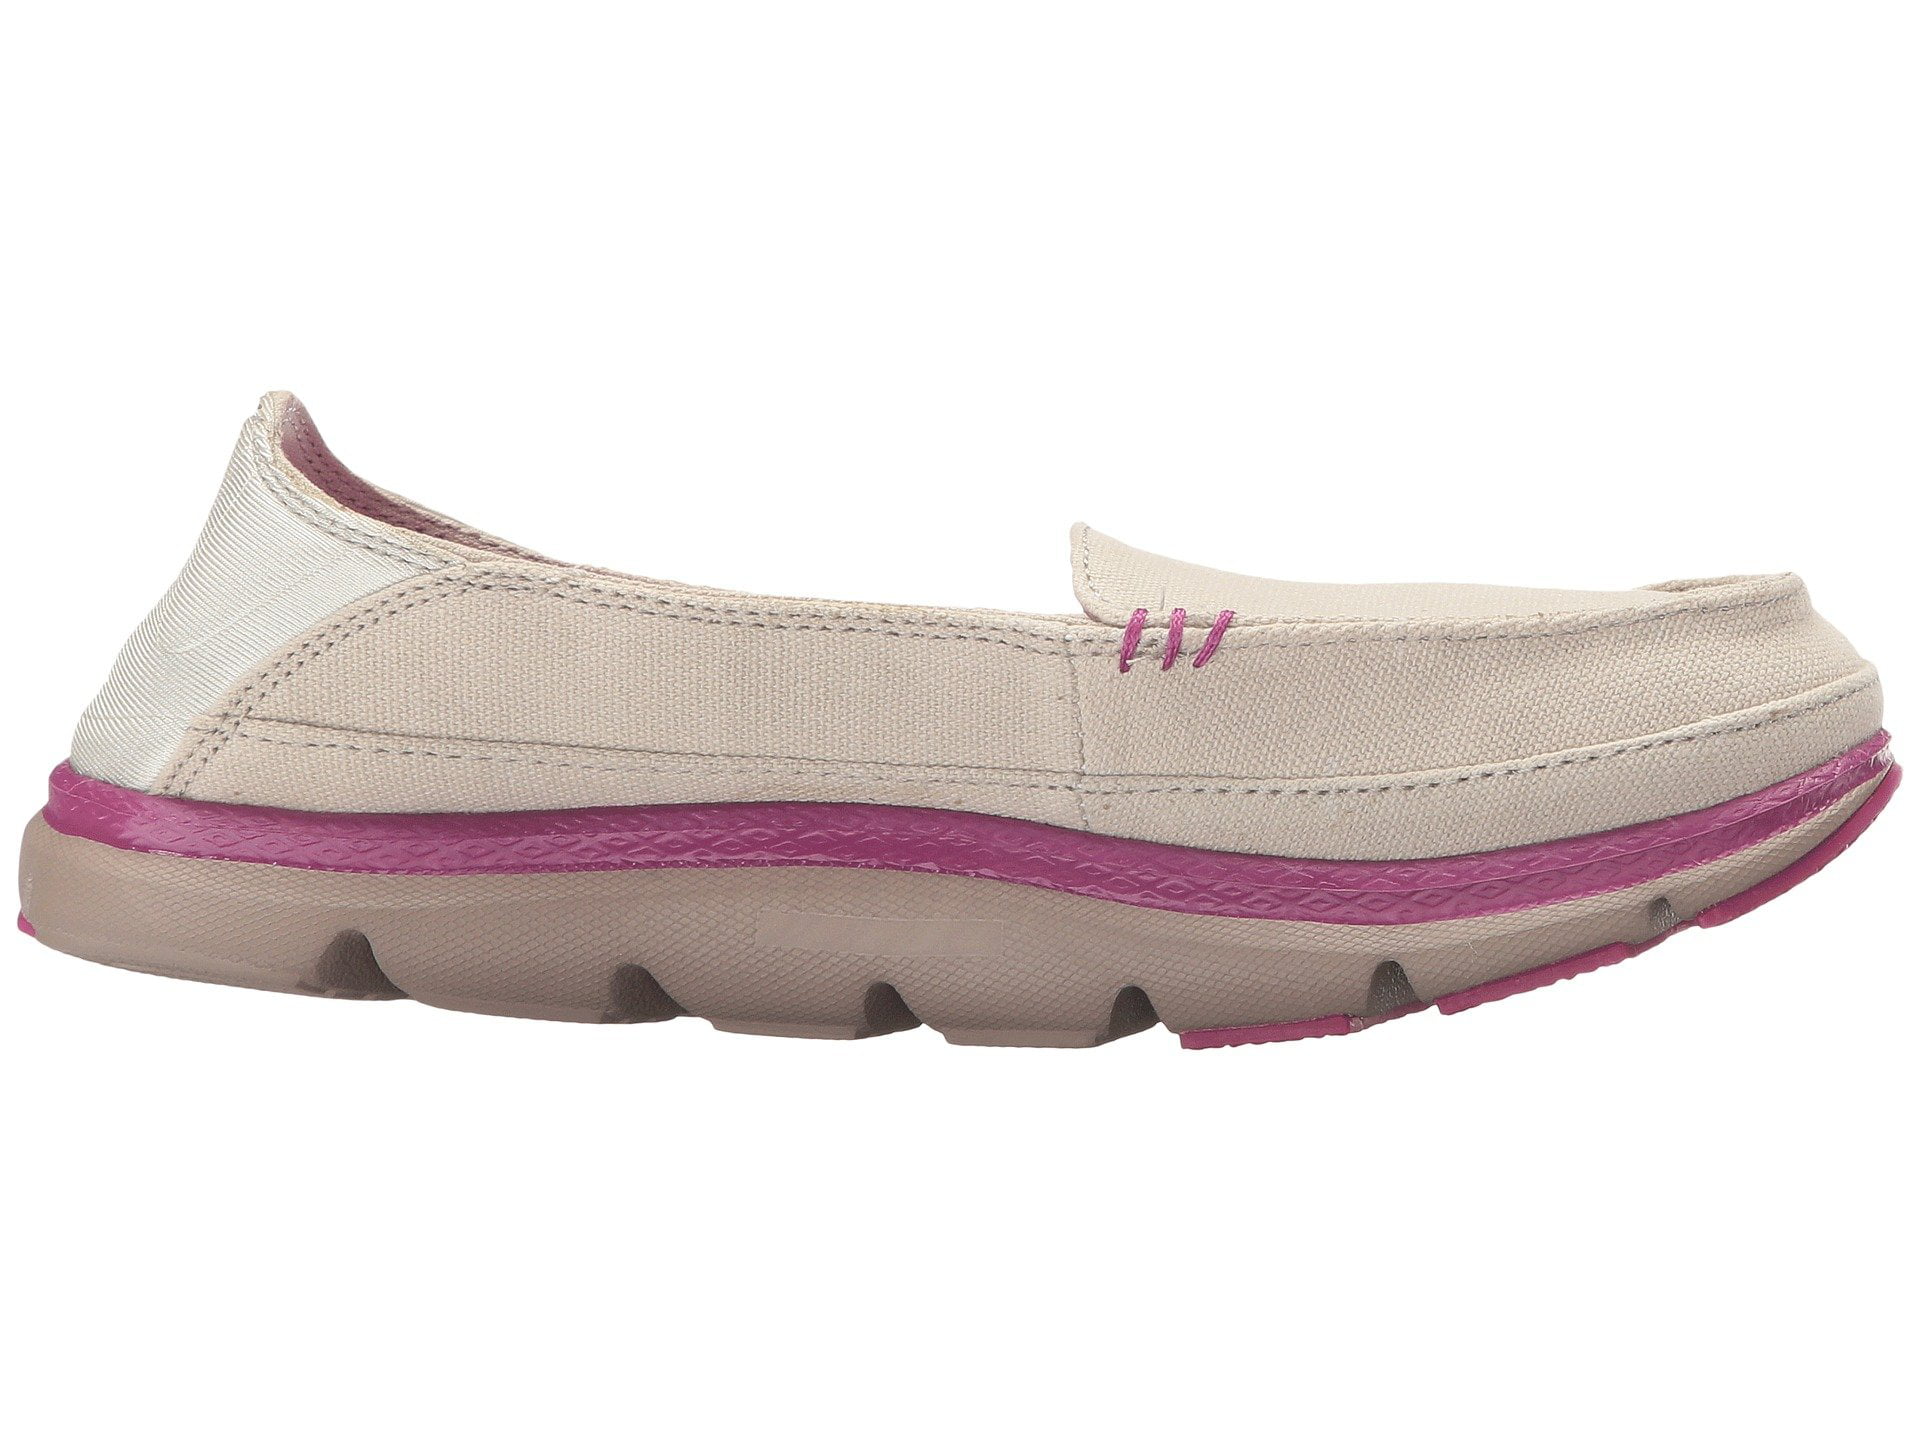 Altra Women's Tokala Casual Slip On Moc Shoes Taupe/Pink (8.0M